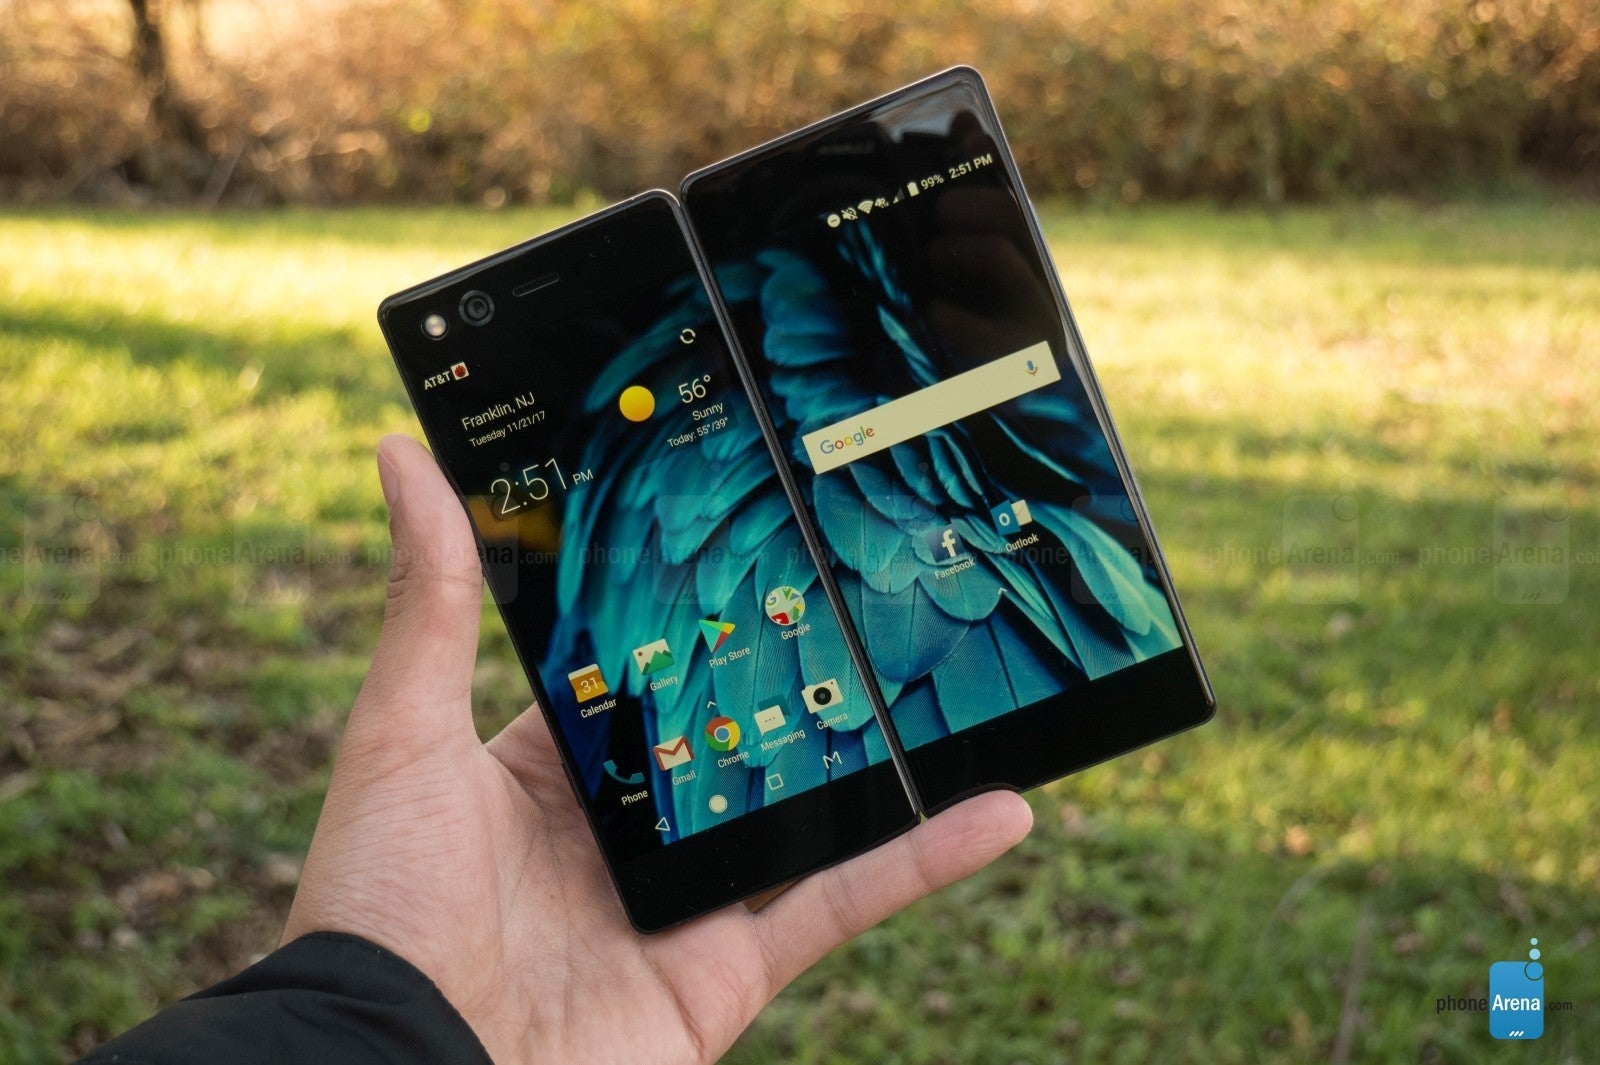 The last mass market foldable smartphone was the ZTE Axon M released not long ago in 2017. Unfortunately, the software wasn't optimized enough to fully take advantage of the larger real-estate of the screen when it was opened up. - Quirky foldable phones you probably forgot about